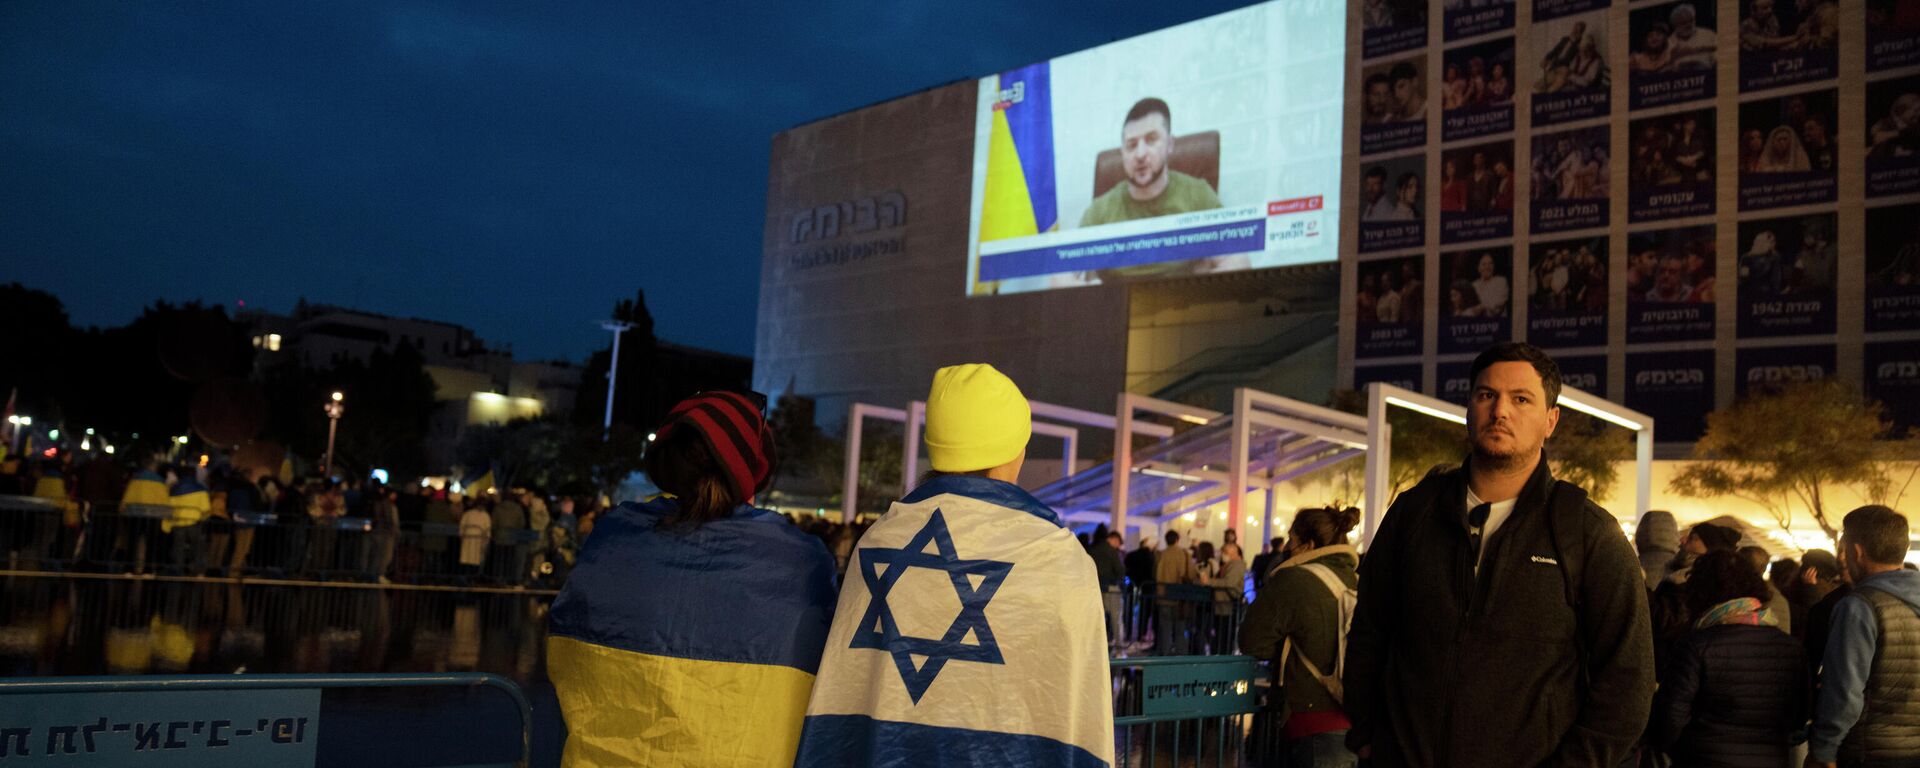 People gather in Habima Square in Tel Aviv, Israel, to watch Ukrainian President Volodymyr Zelensky  in a video address to the Knesset, Israel's parliament, Sunday, March 20, 2022 - Sputnik International, 1920, 02.05.2022